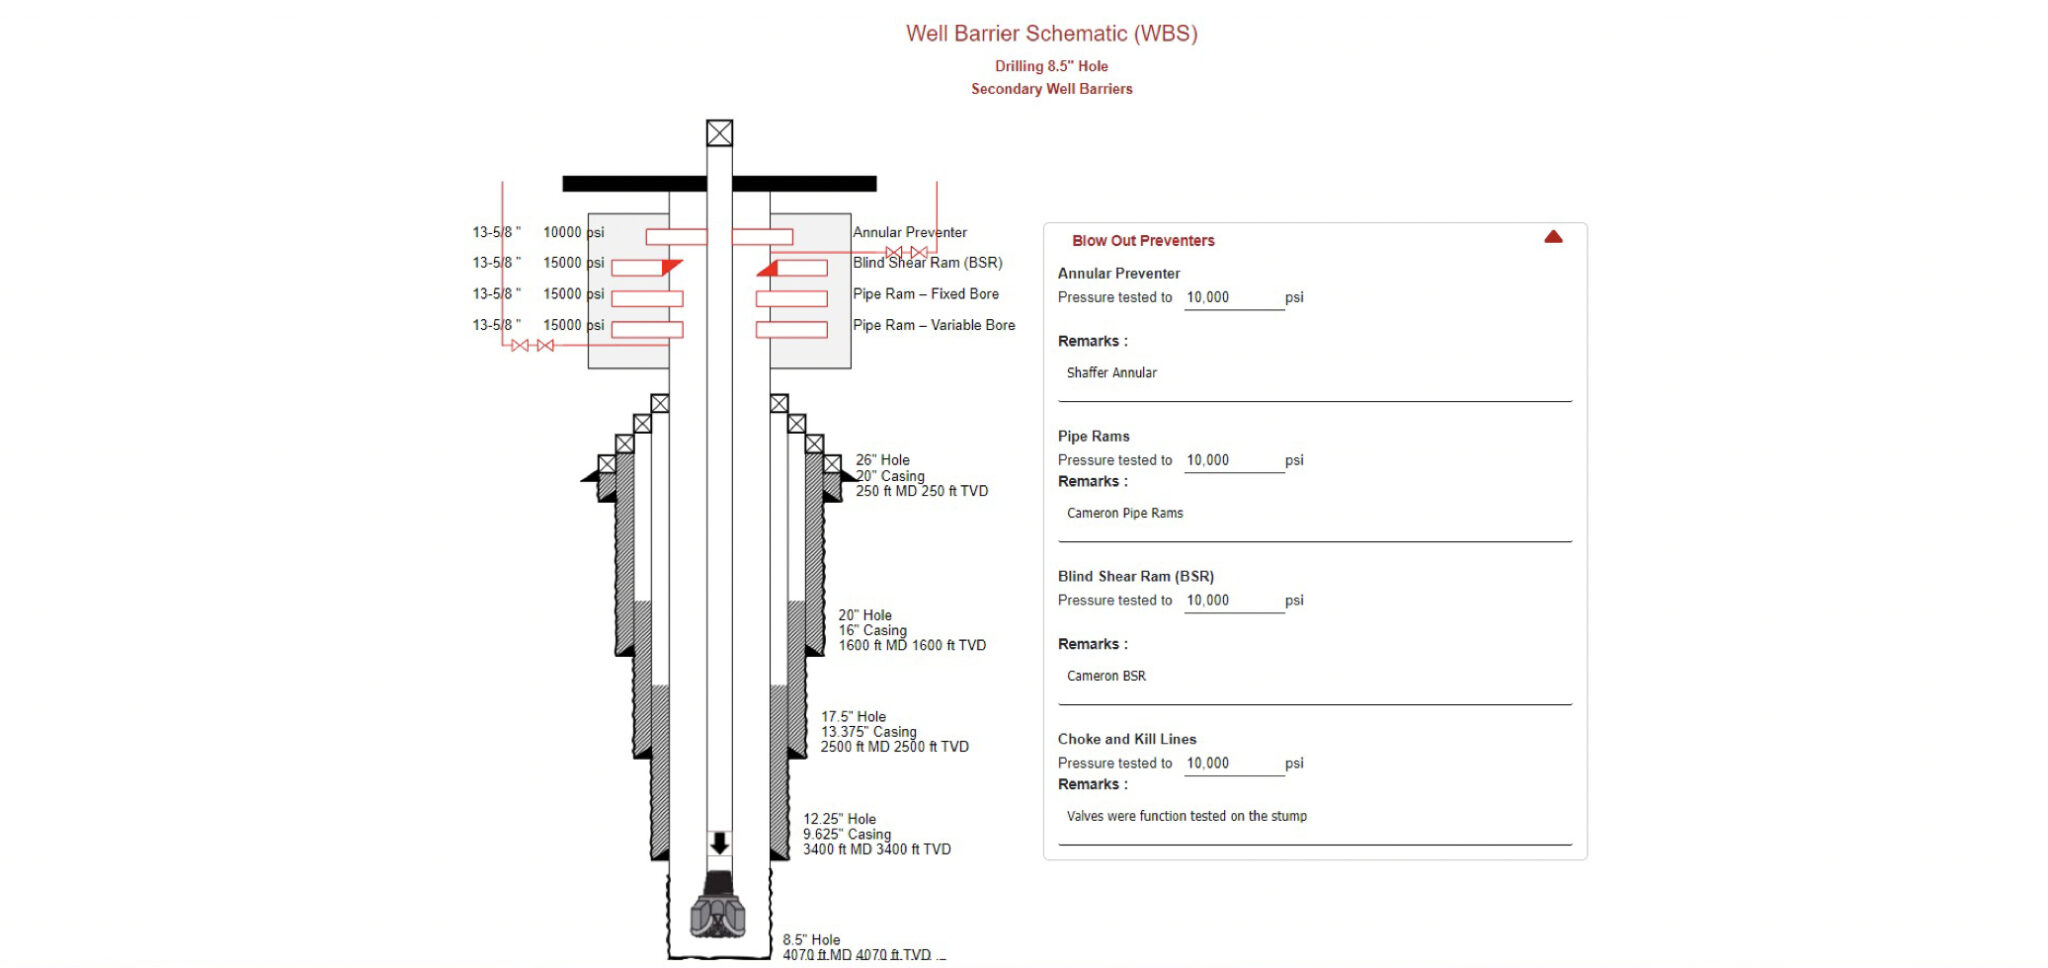 Secondary Well Barriers (Image shown for Drilling - BOPE)